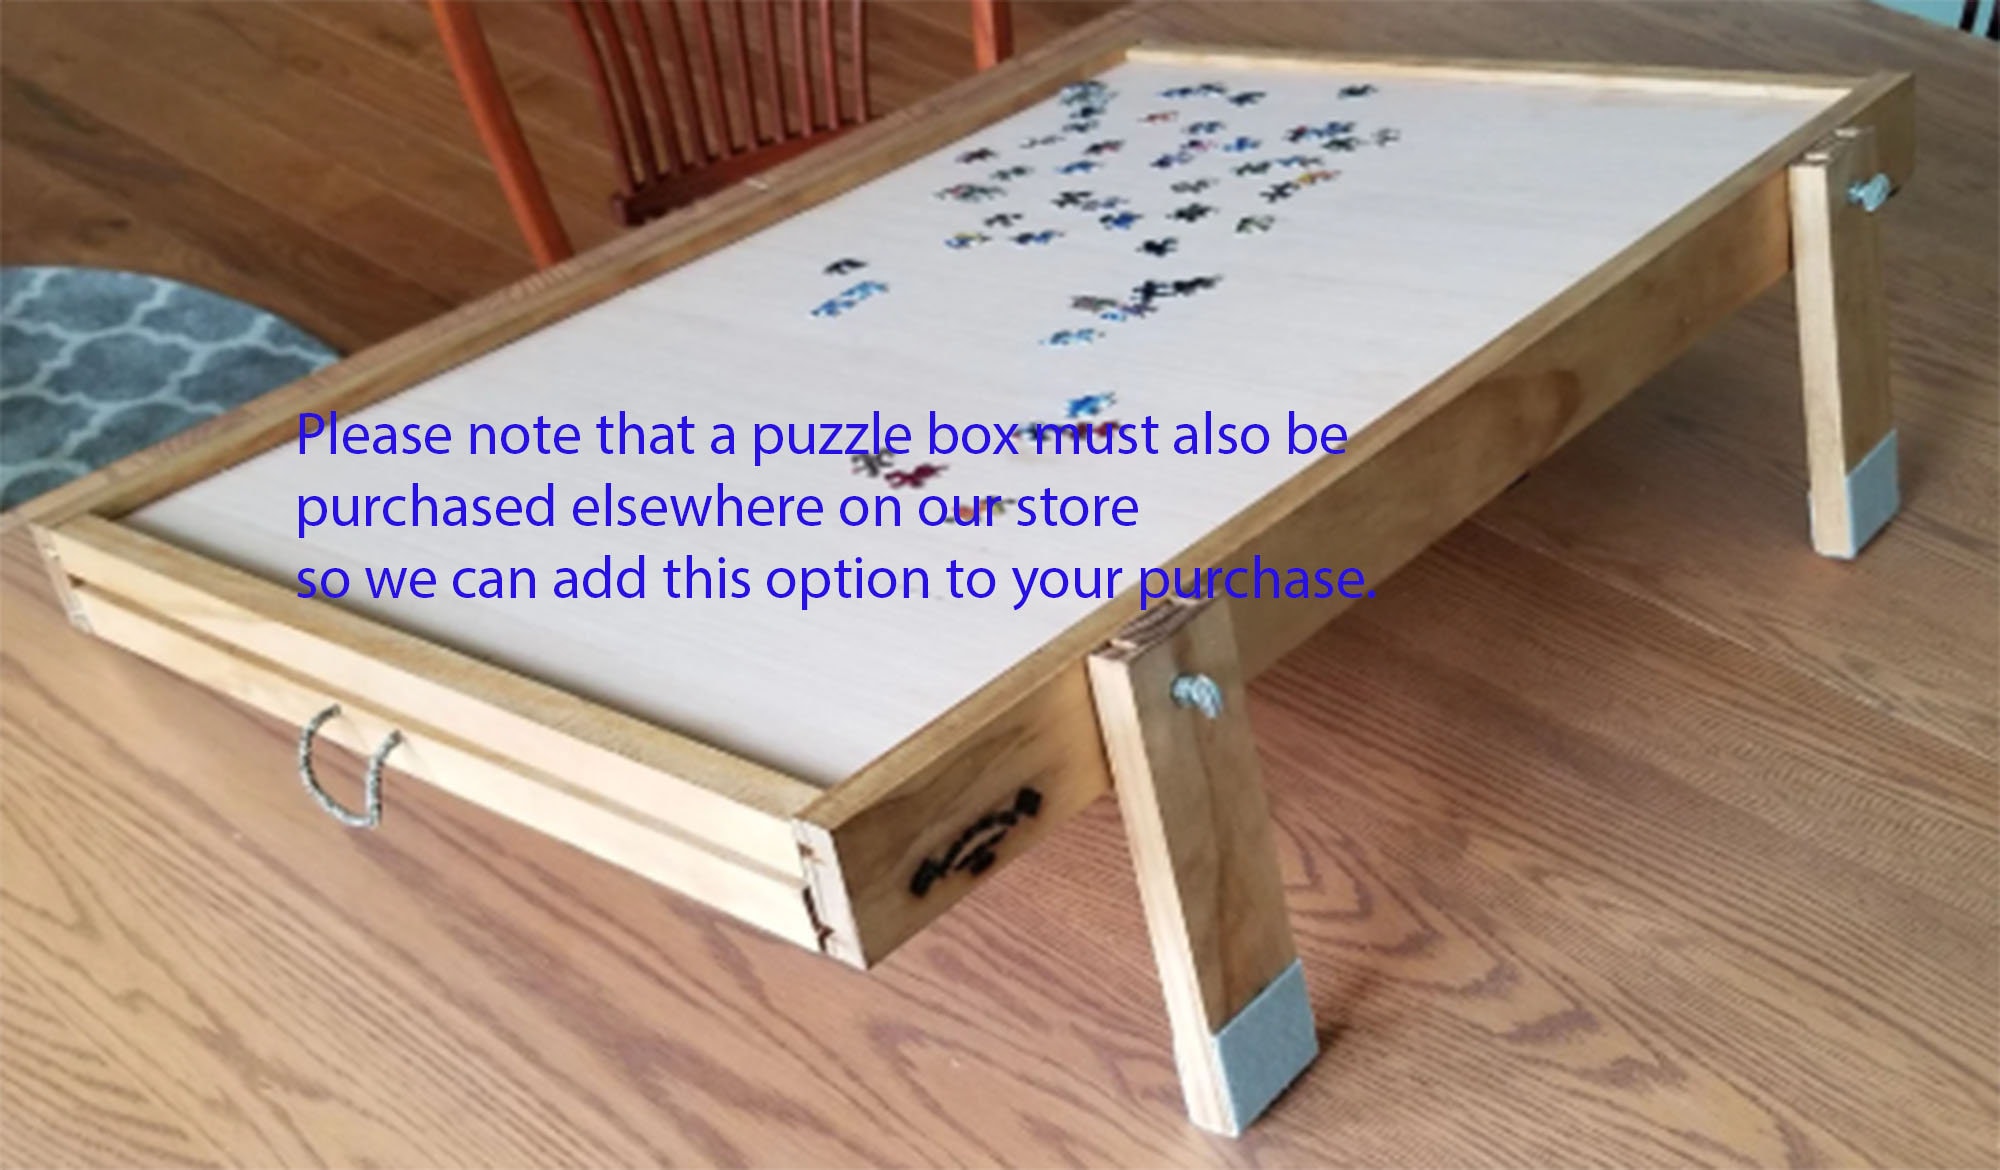 Easel Turn the Puzzle Box That Also Needs to Be Ordered Into an